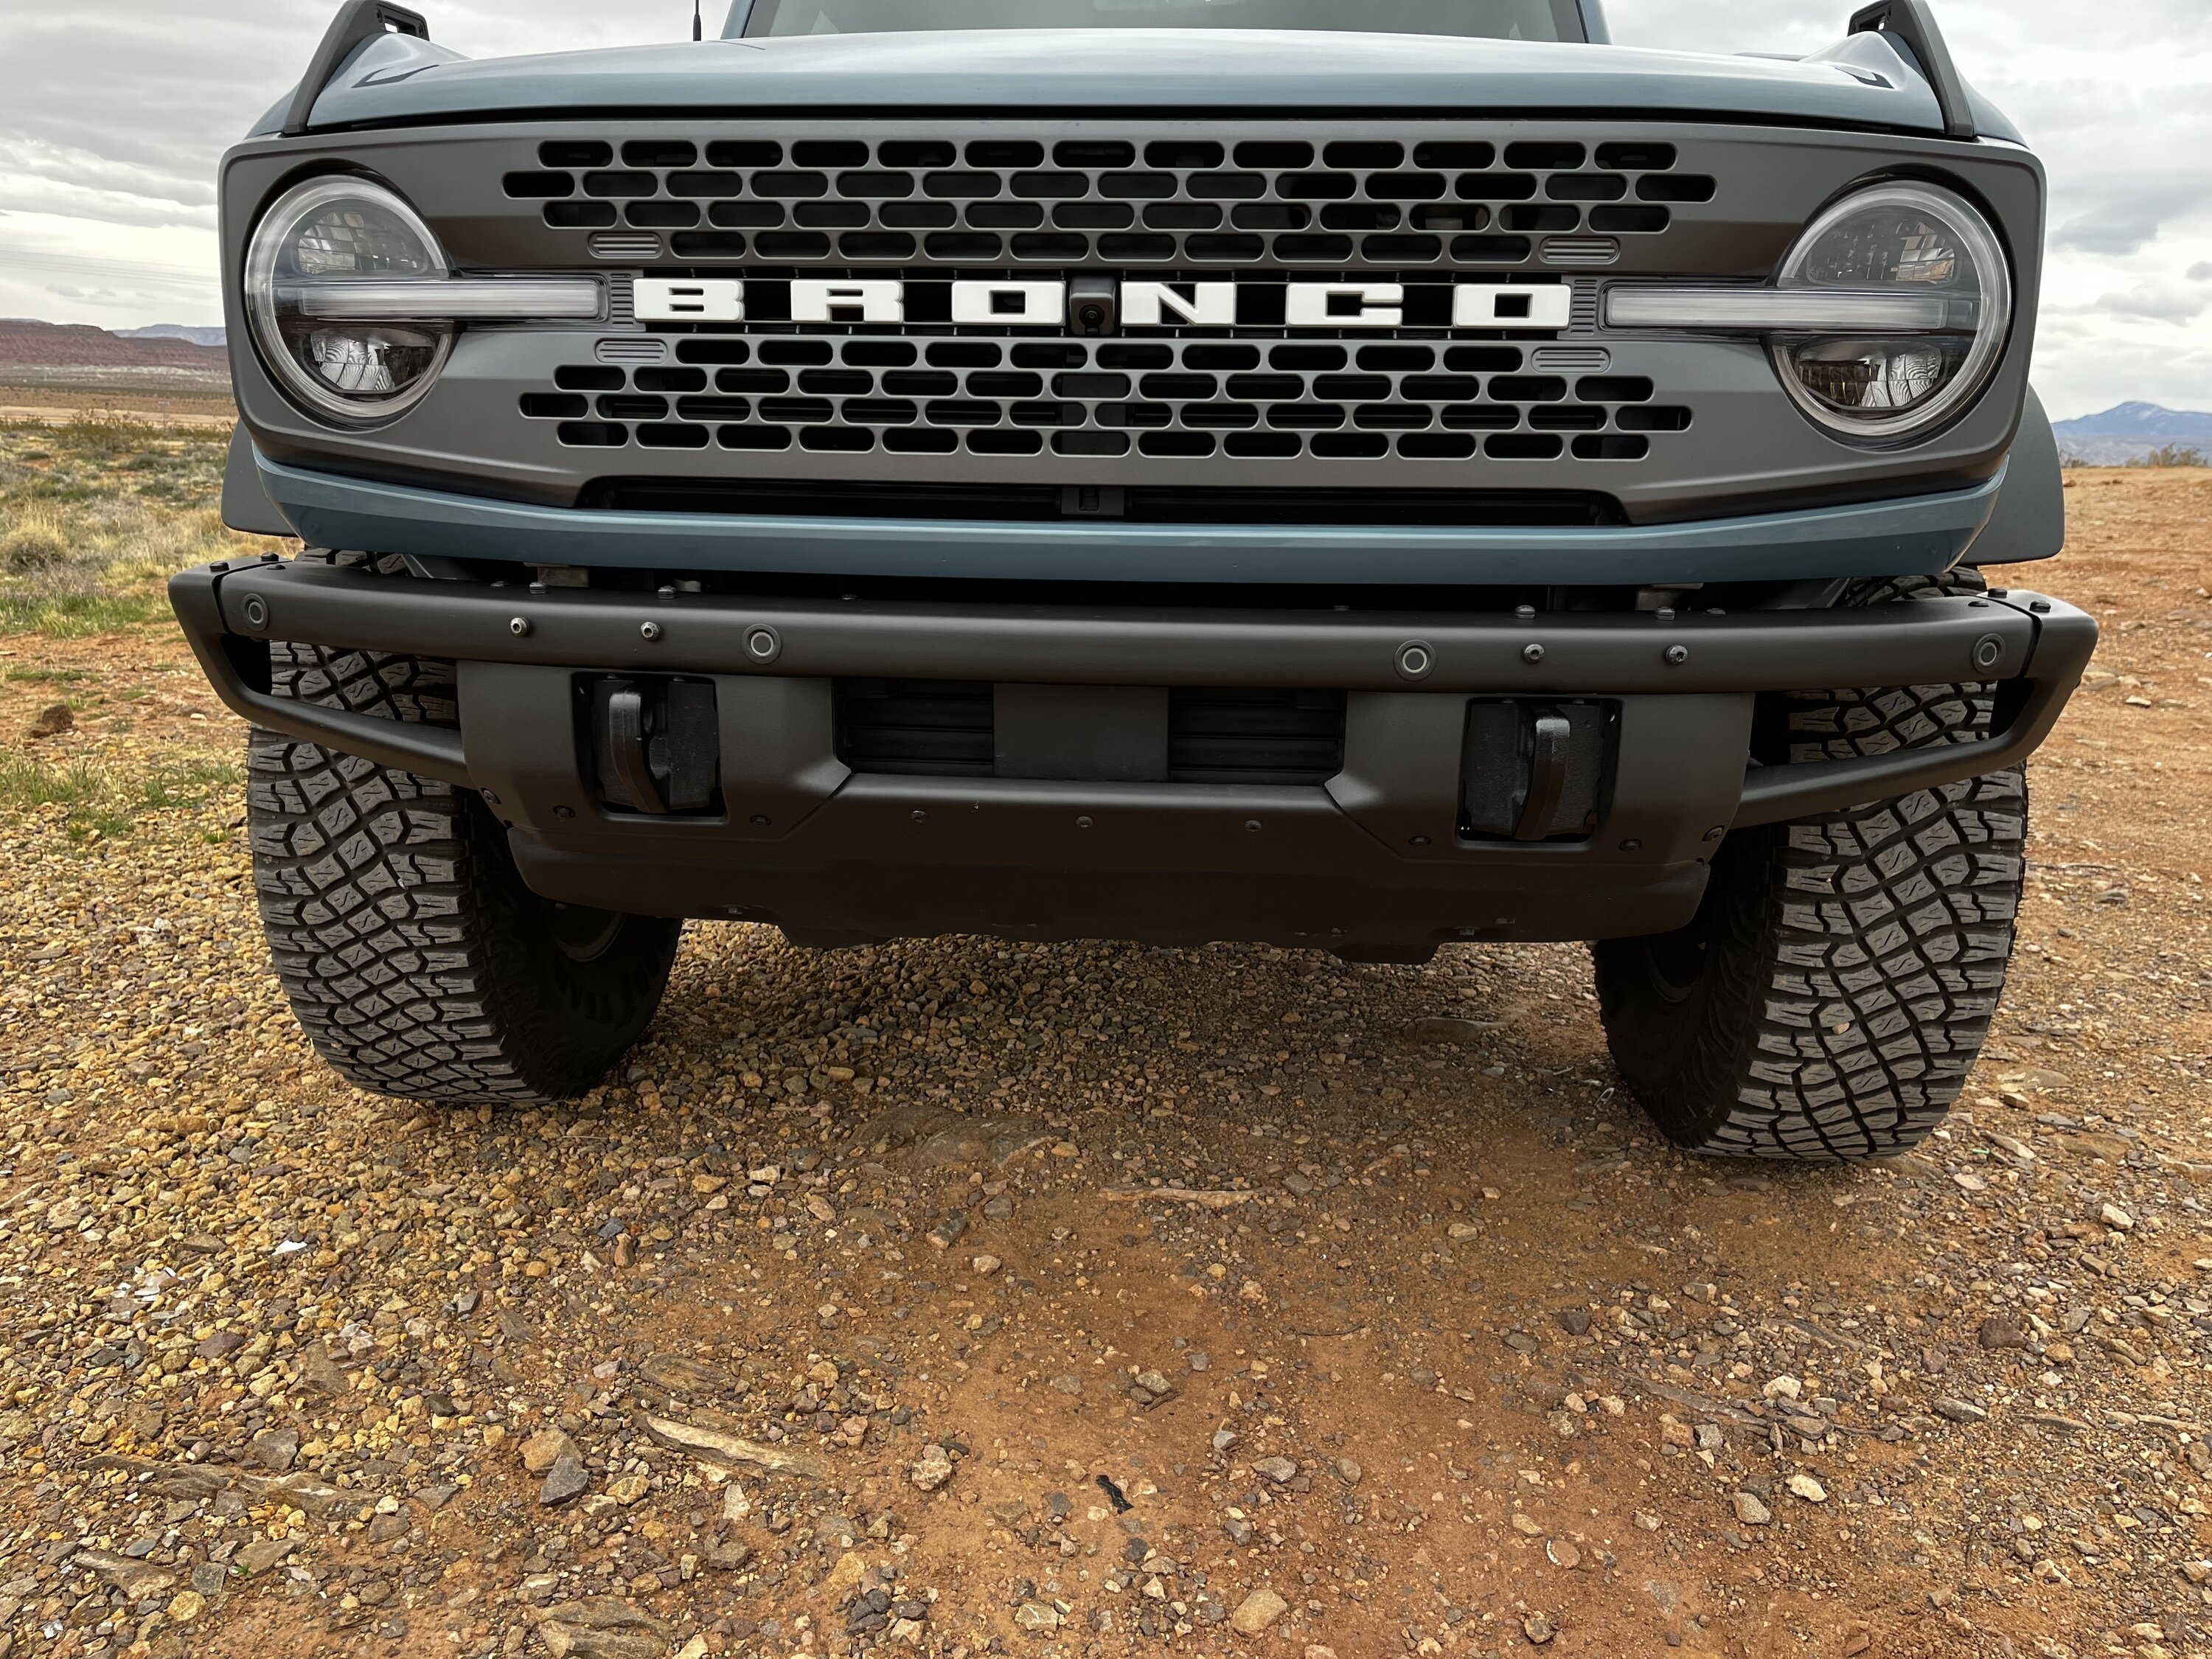 Ford Bronco Trying to find lights - what bumper is this? Front Bumper